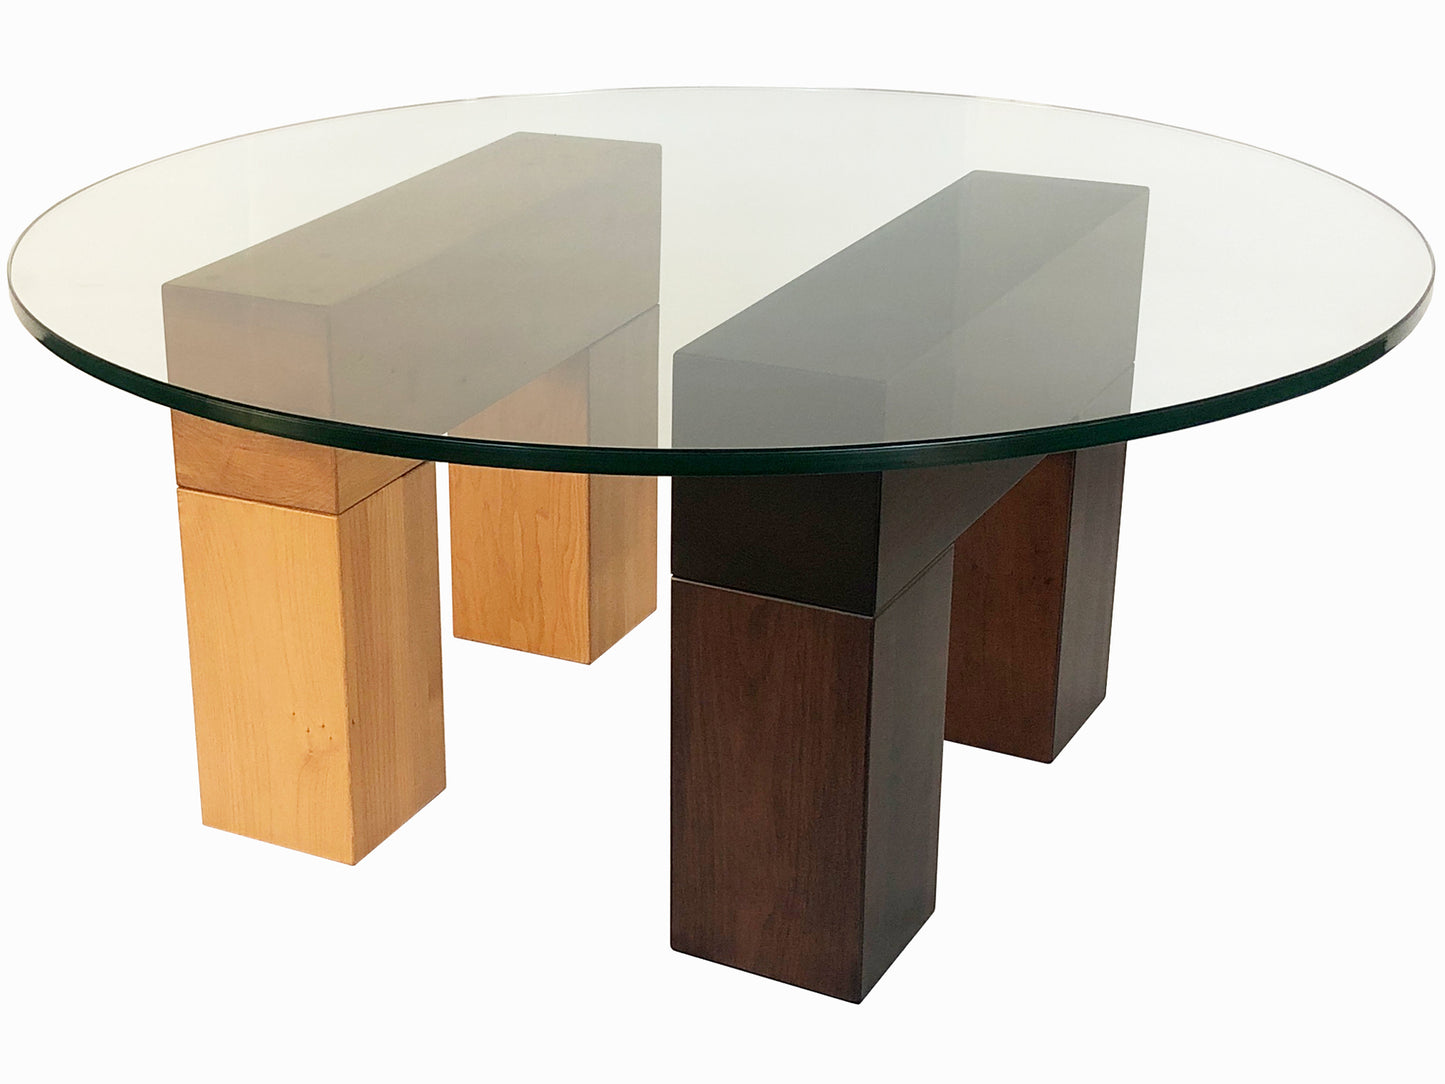 Tangent Round Coffee Table - alternative configuration 3 - see video